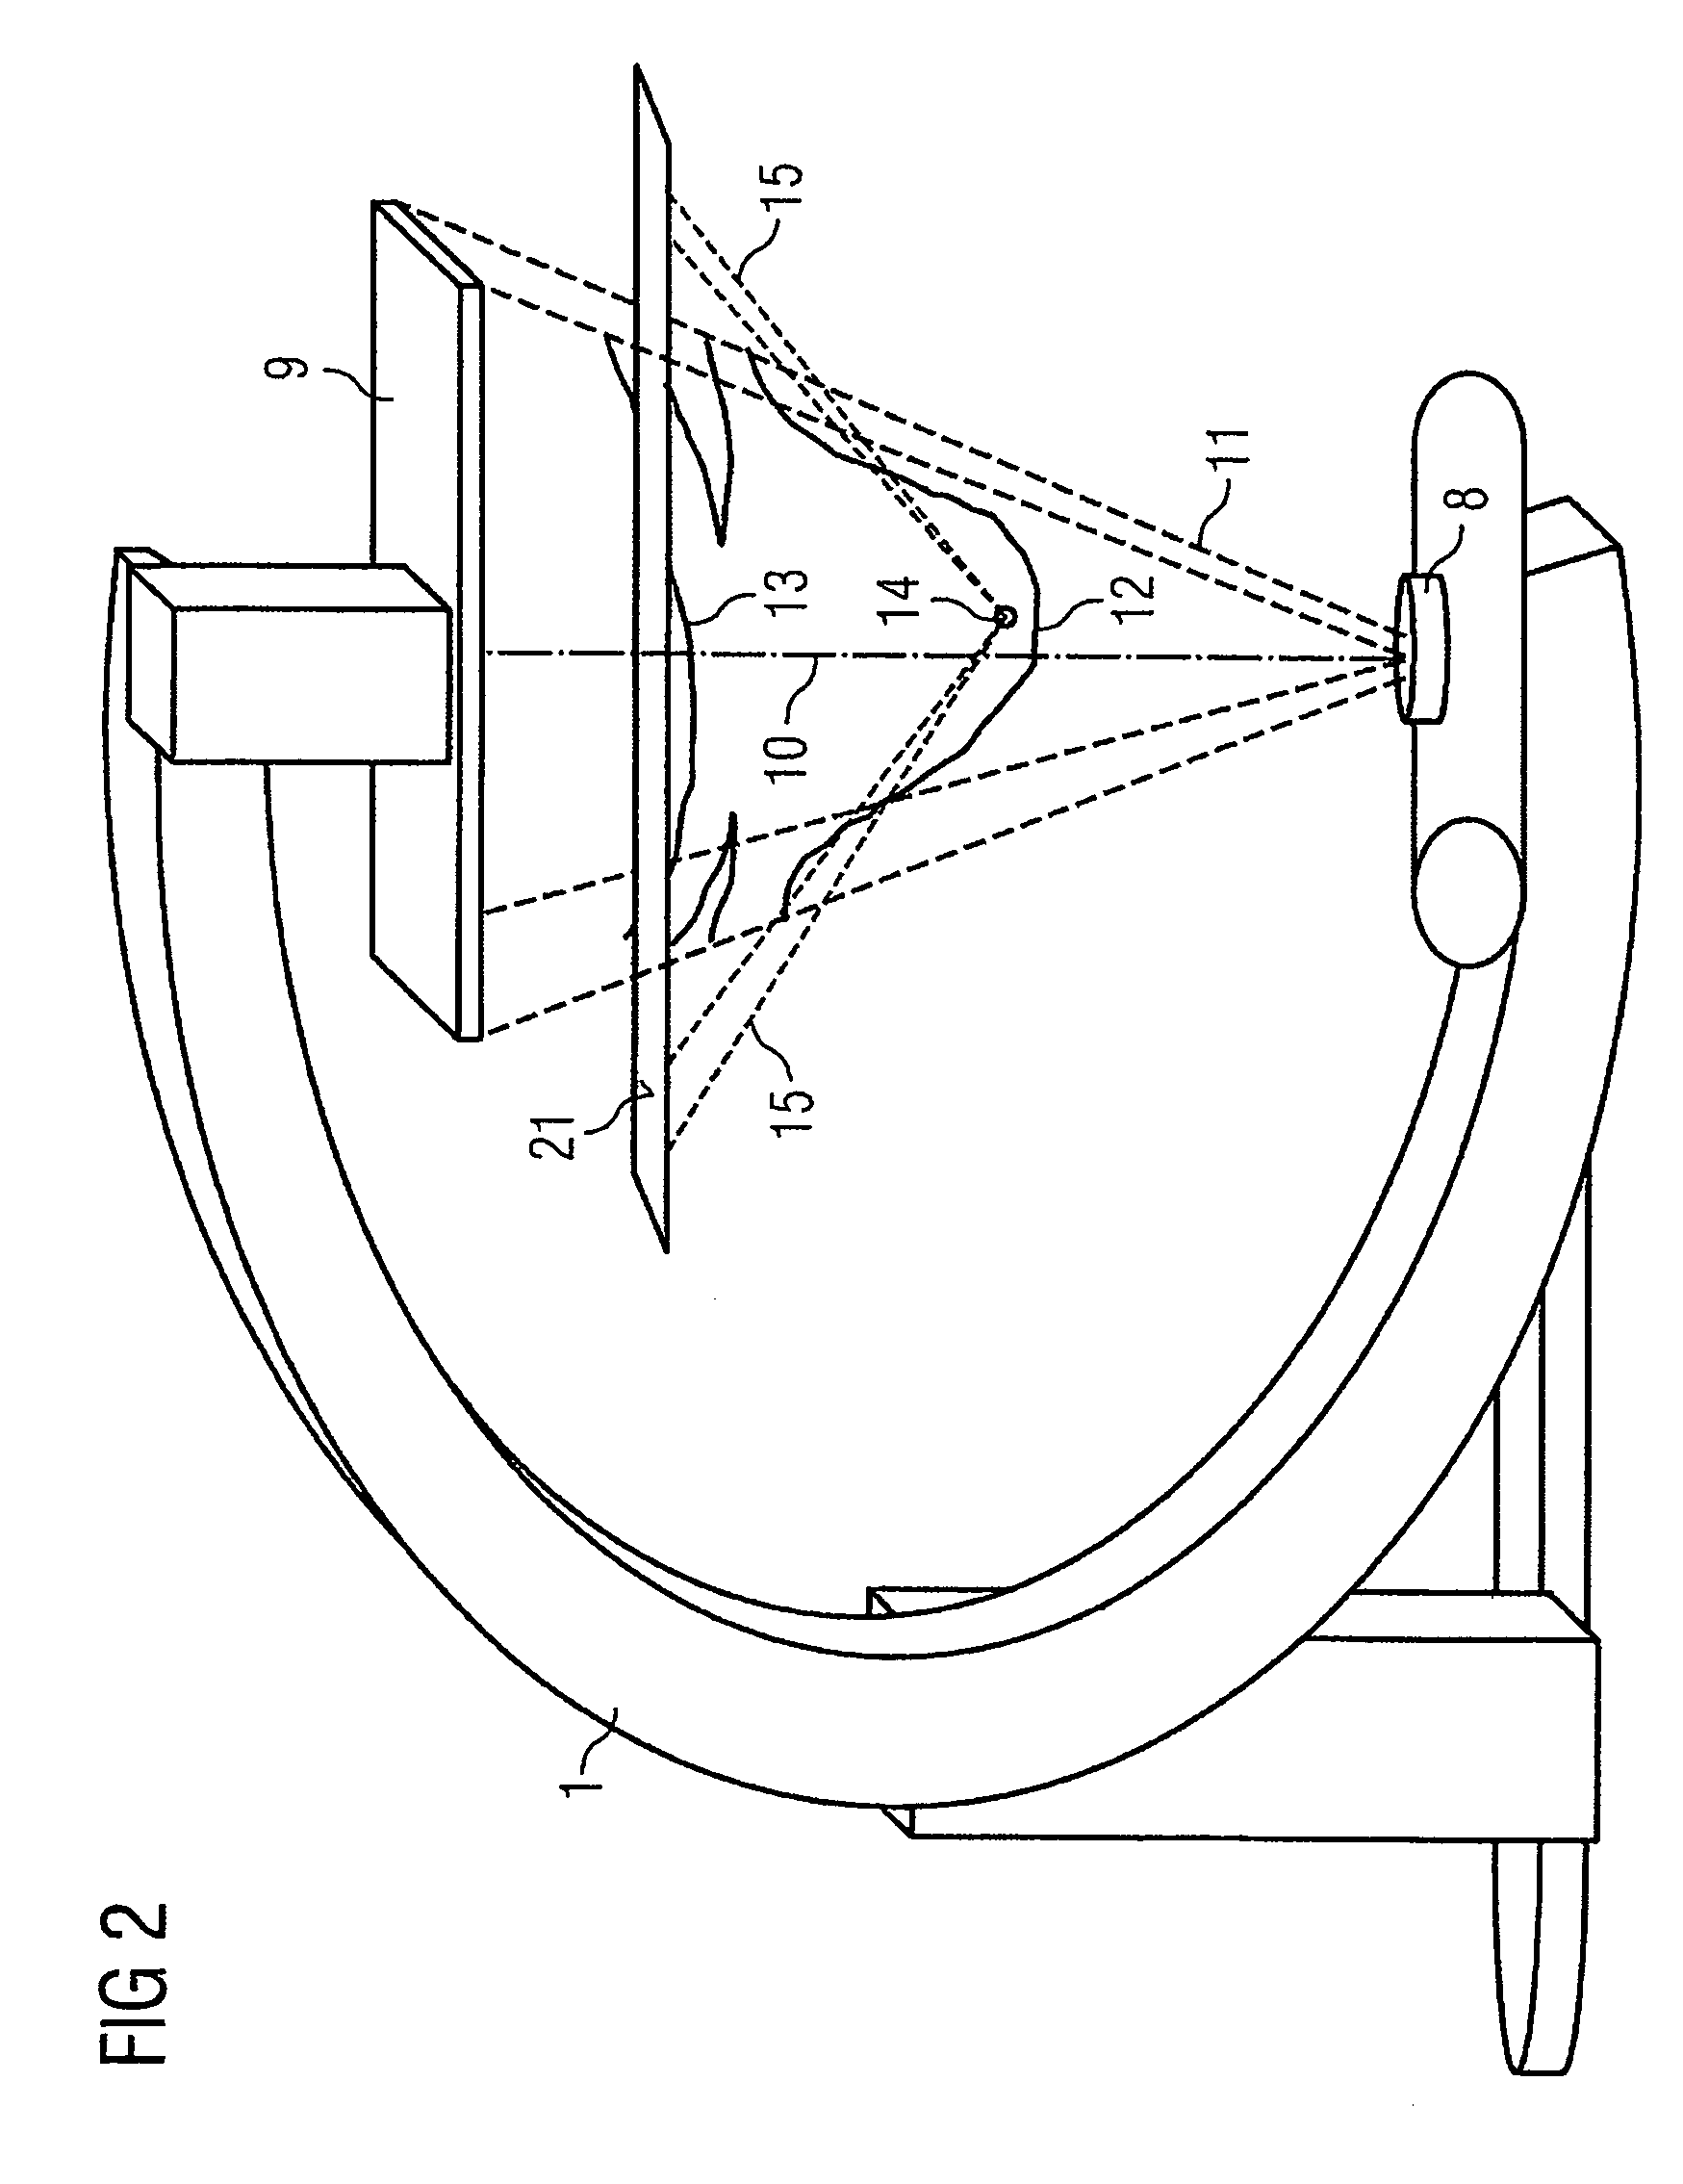 Device for merging a 2D radioscopy image with an image from a 3D image data record